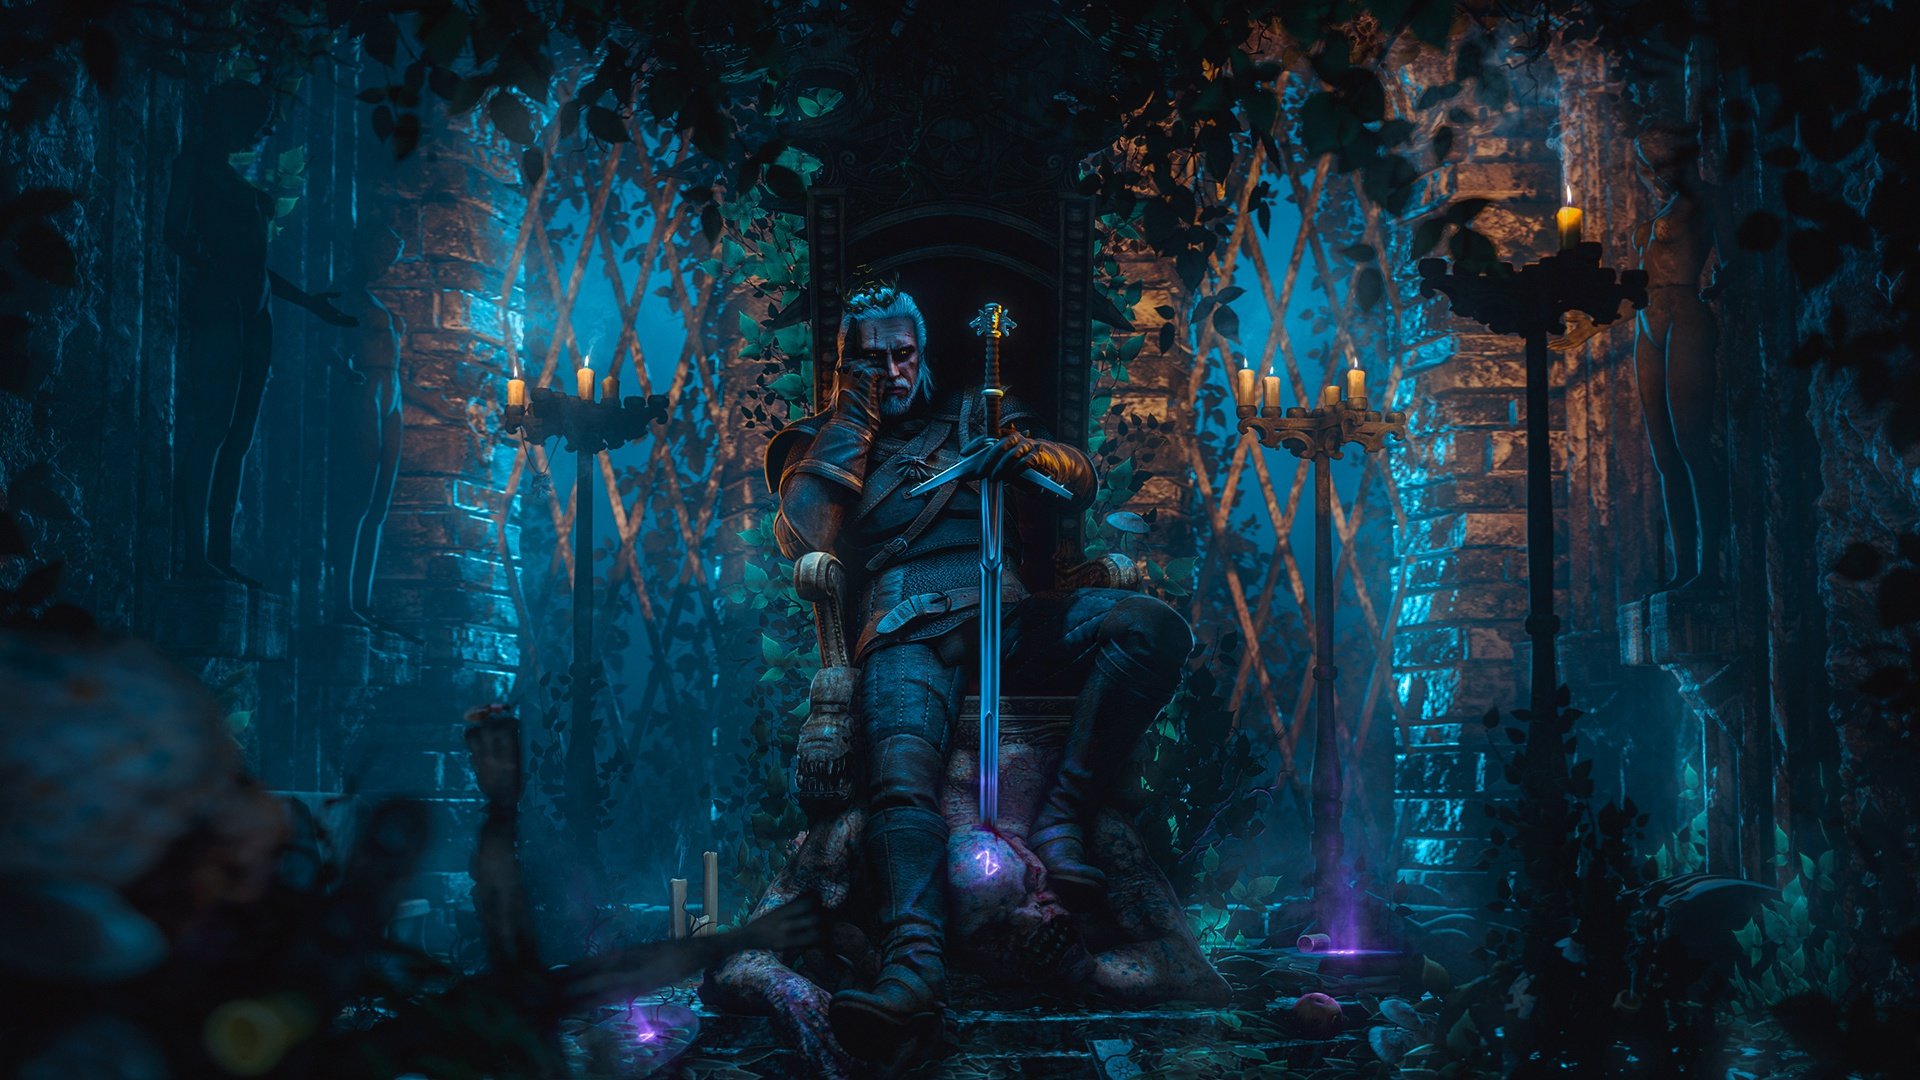 Best The Witcher 3: Wild Hunt wallpaper ID:18097 for High Resolution hd 1920x1080 computer